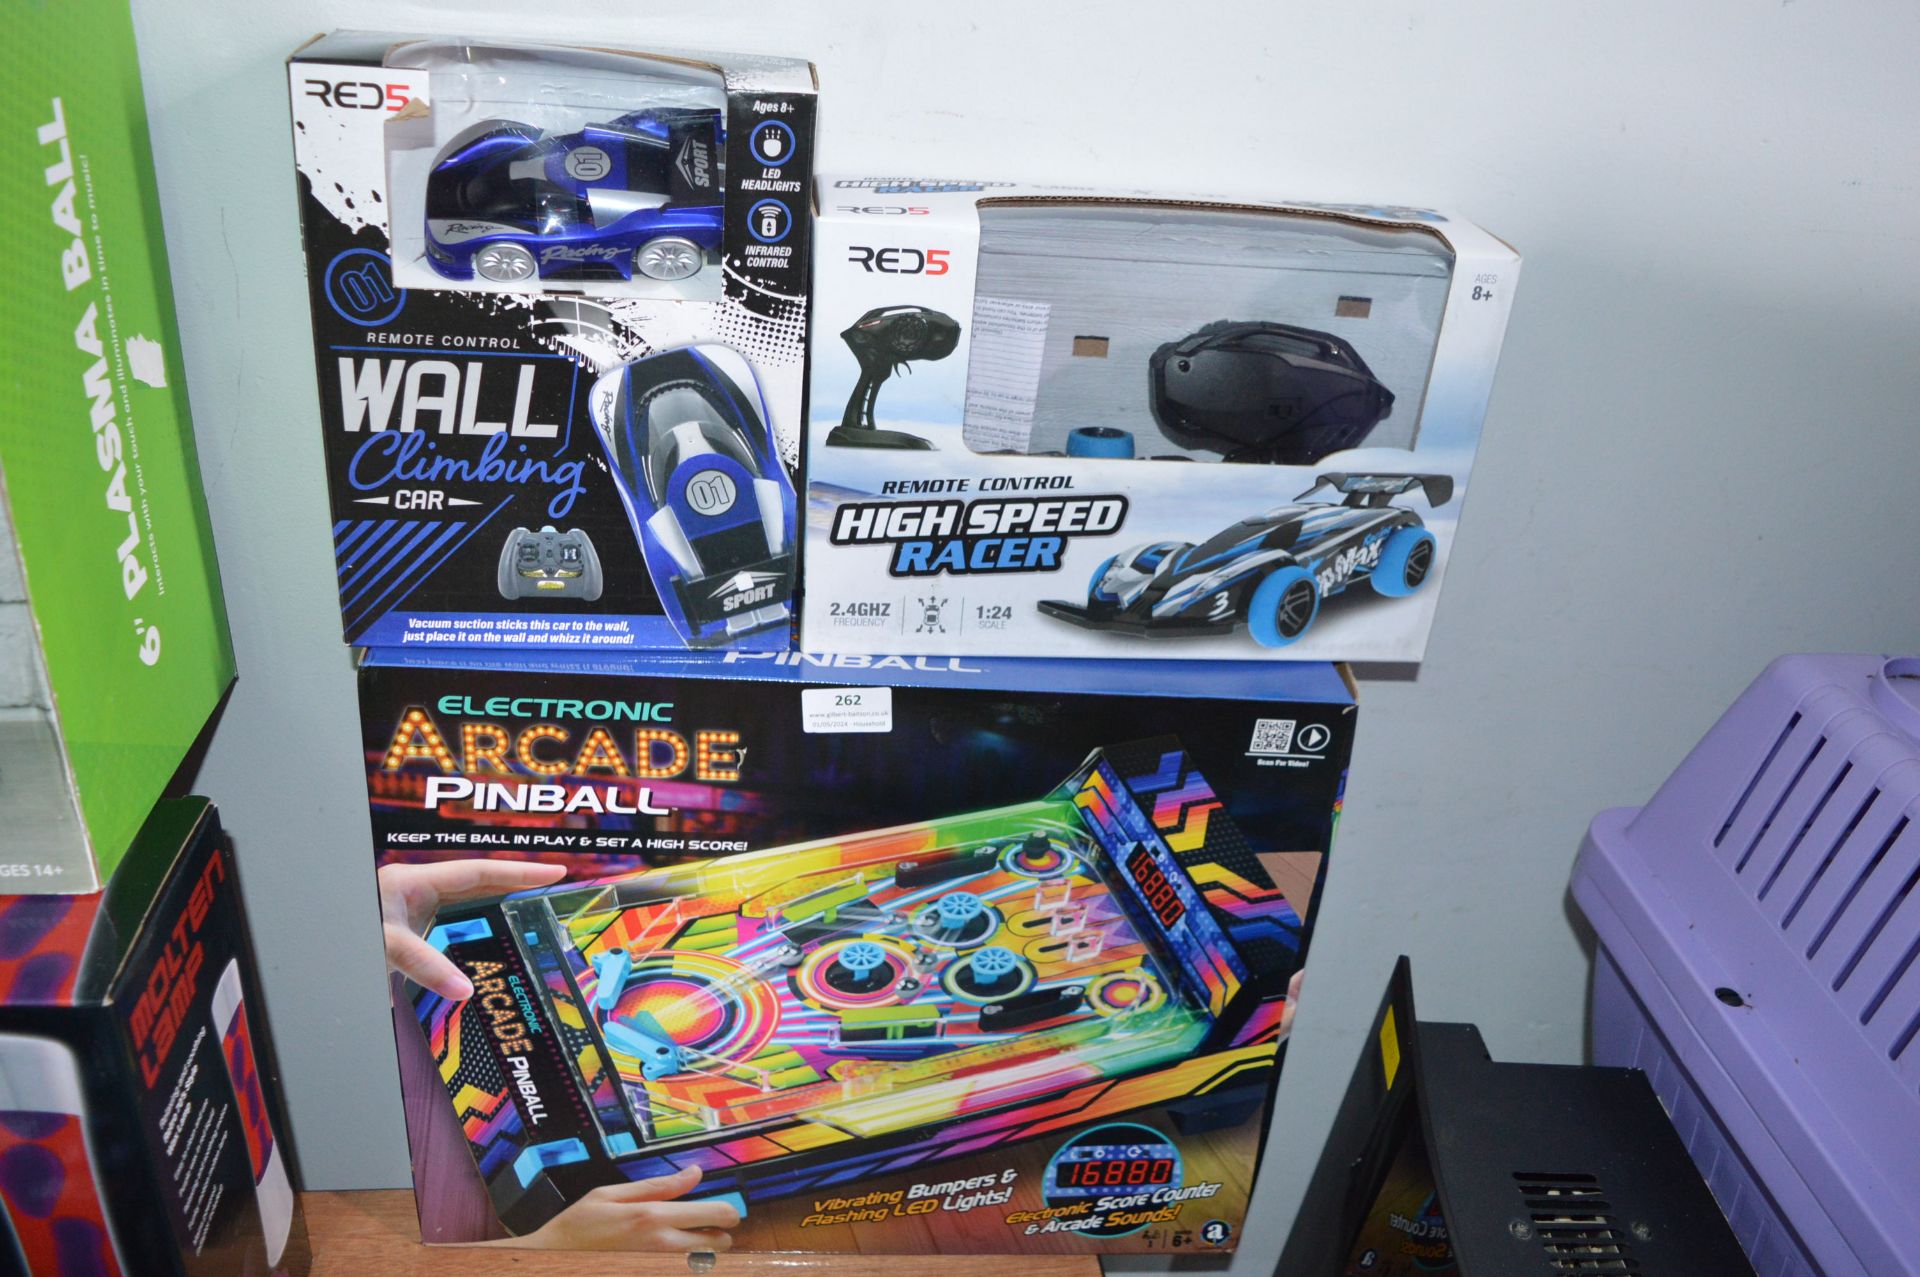 Electronic Pinball Game, and RC Cars